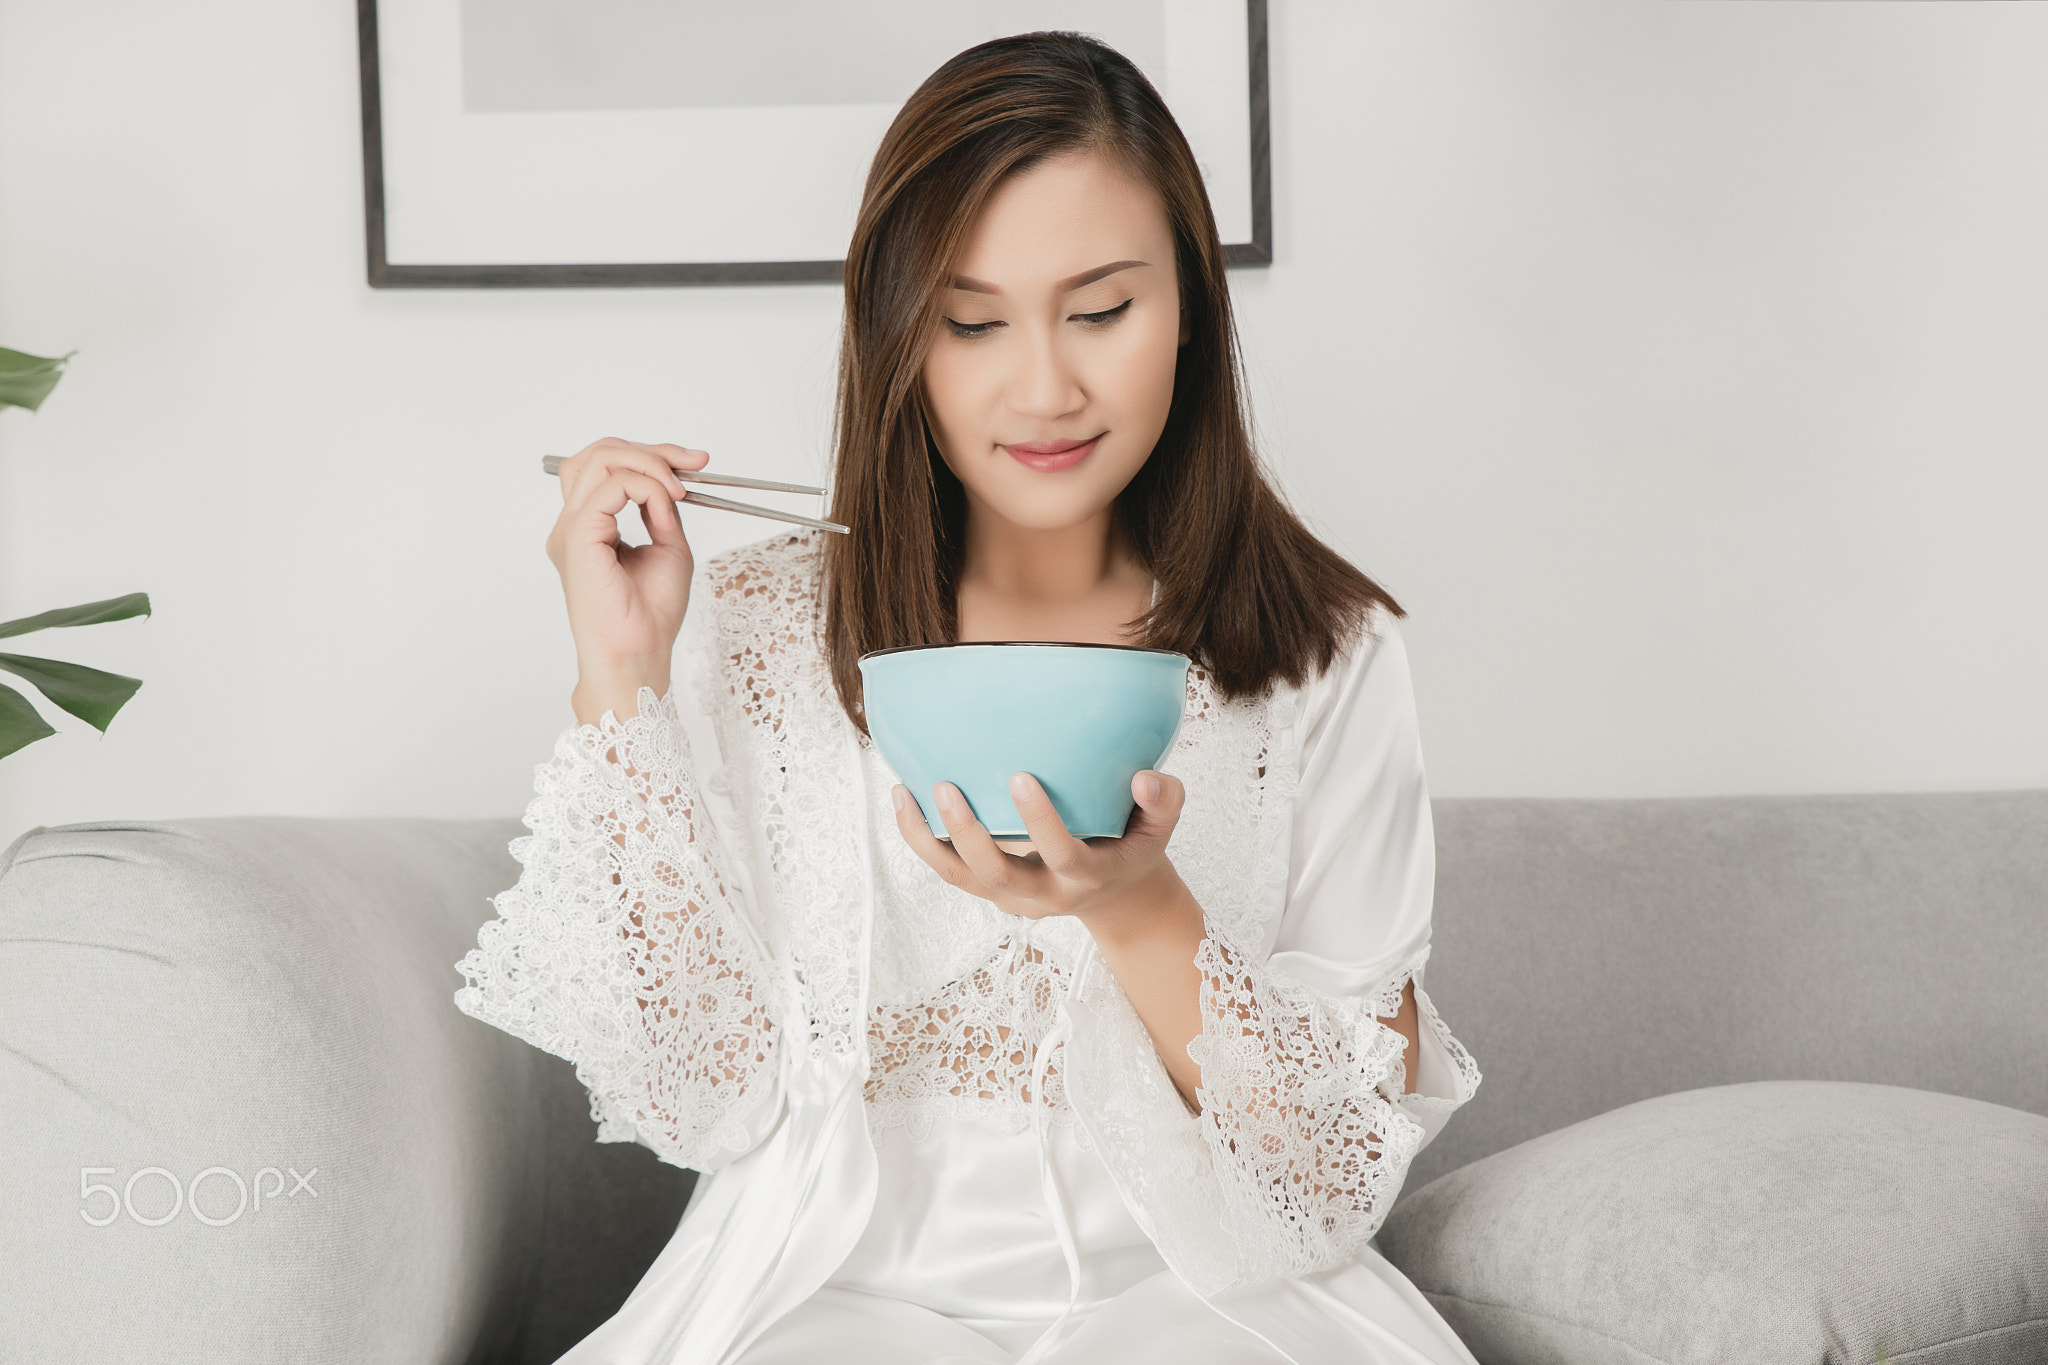 A woman wearing silk nightwear and lace robe eating Instant noodles